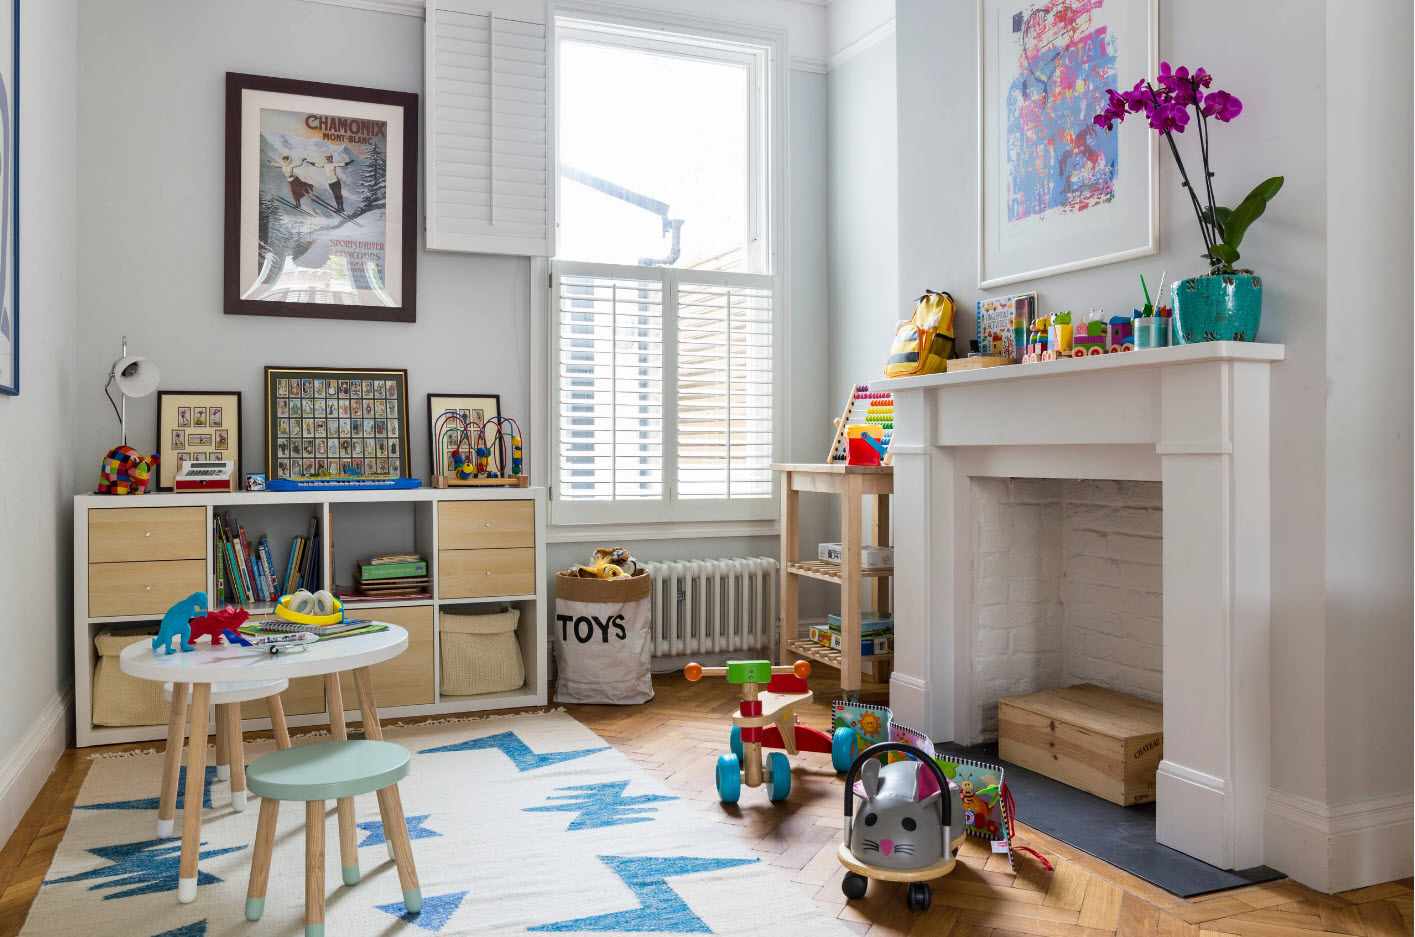 an example of an unusual style of a children's room